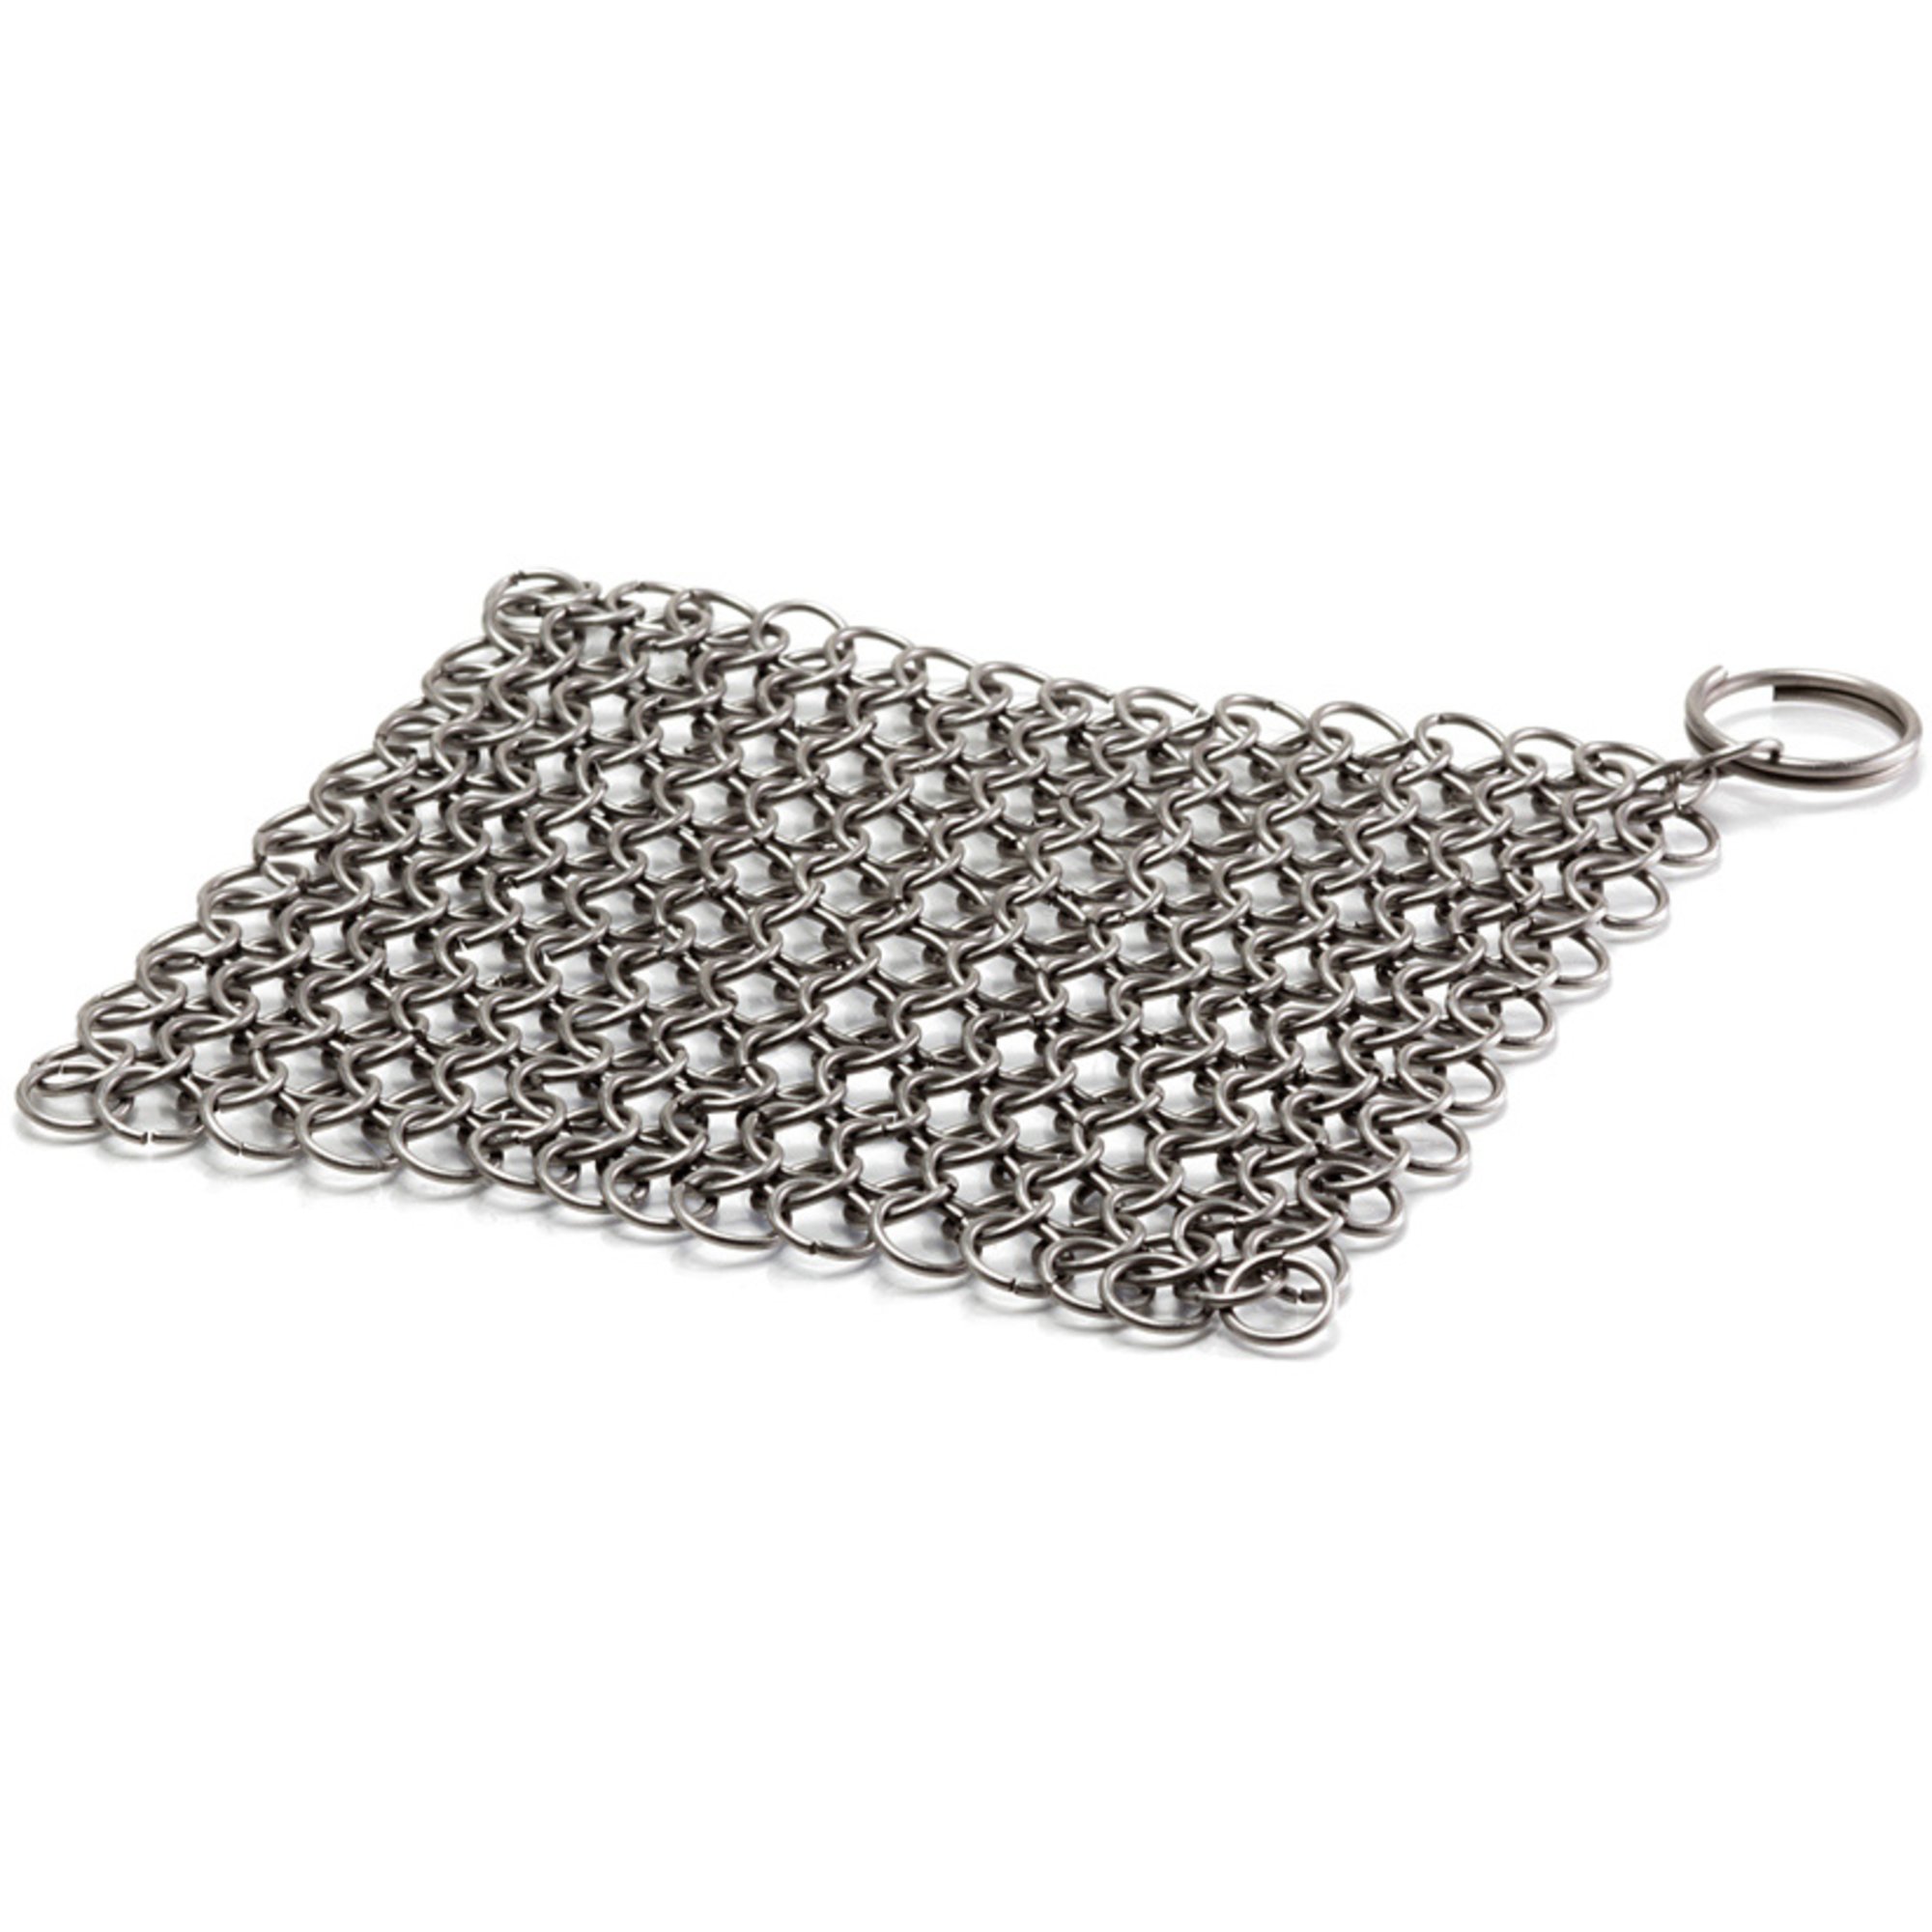 Petromax Chain Mail Cleaner XL, rustfrit stål